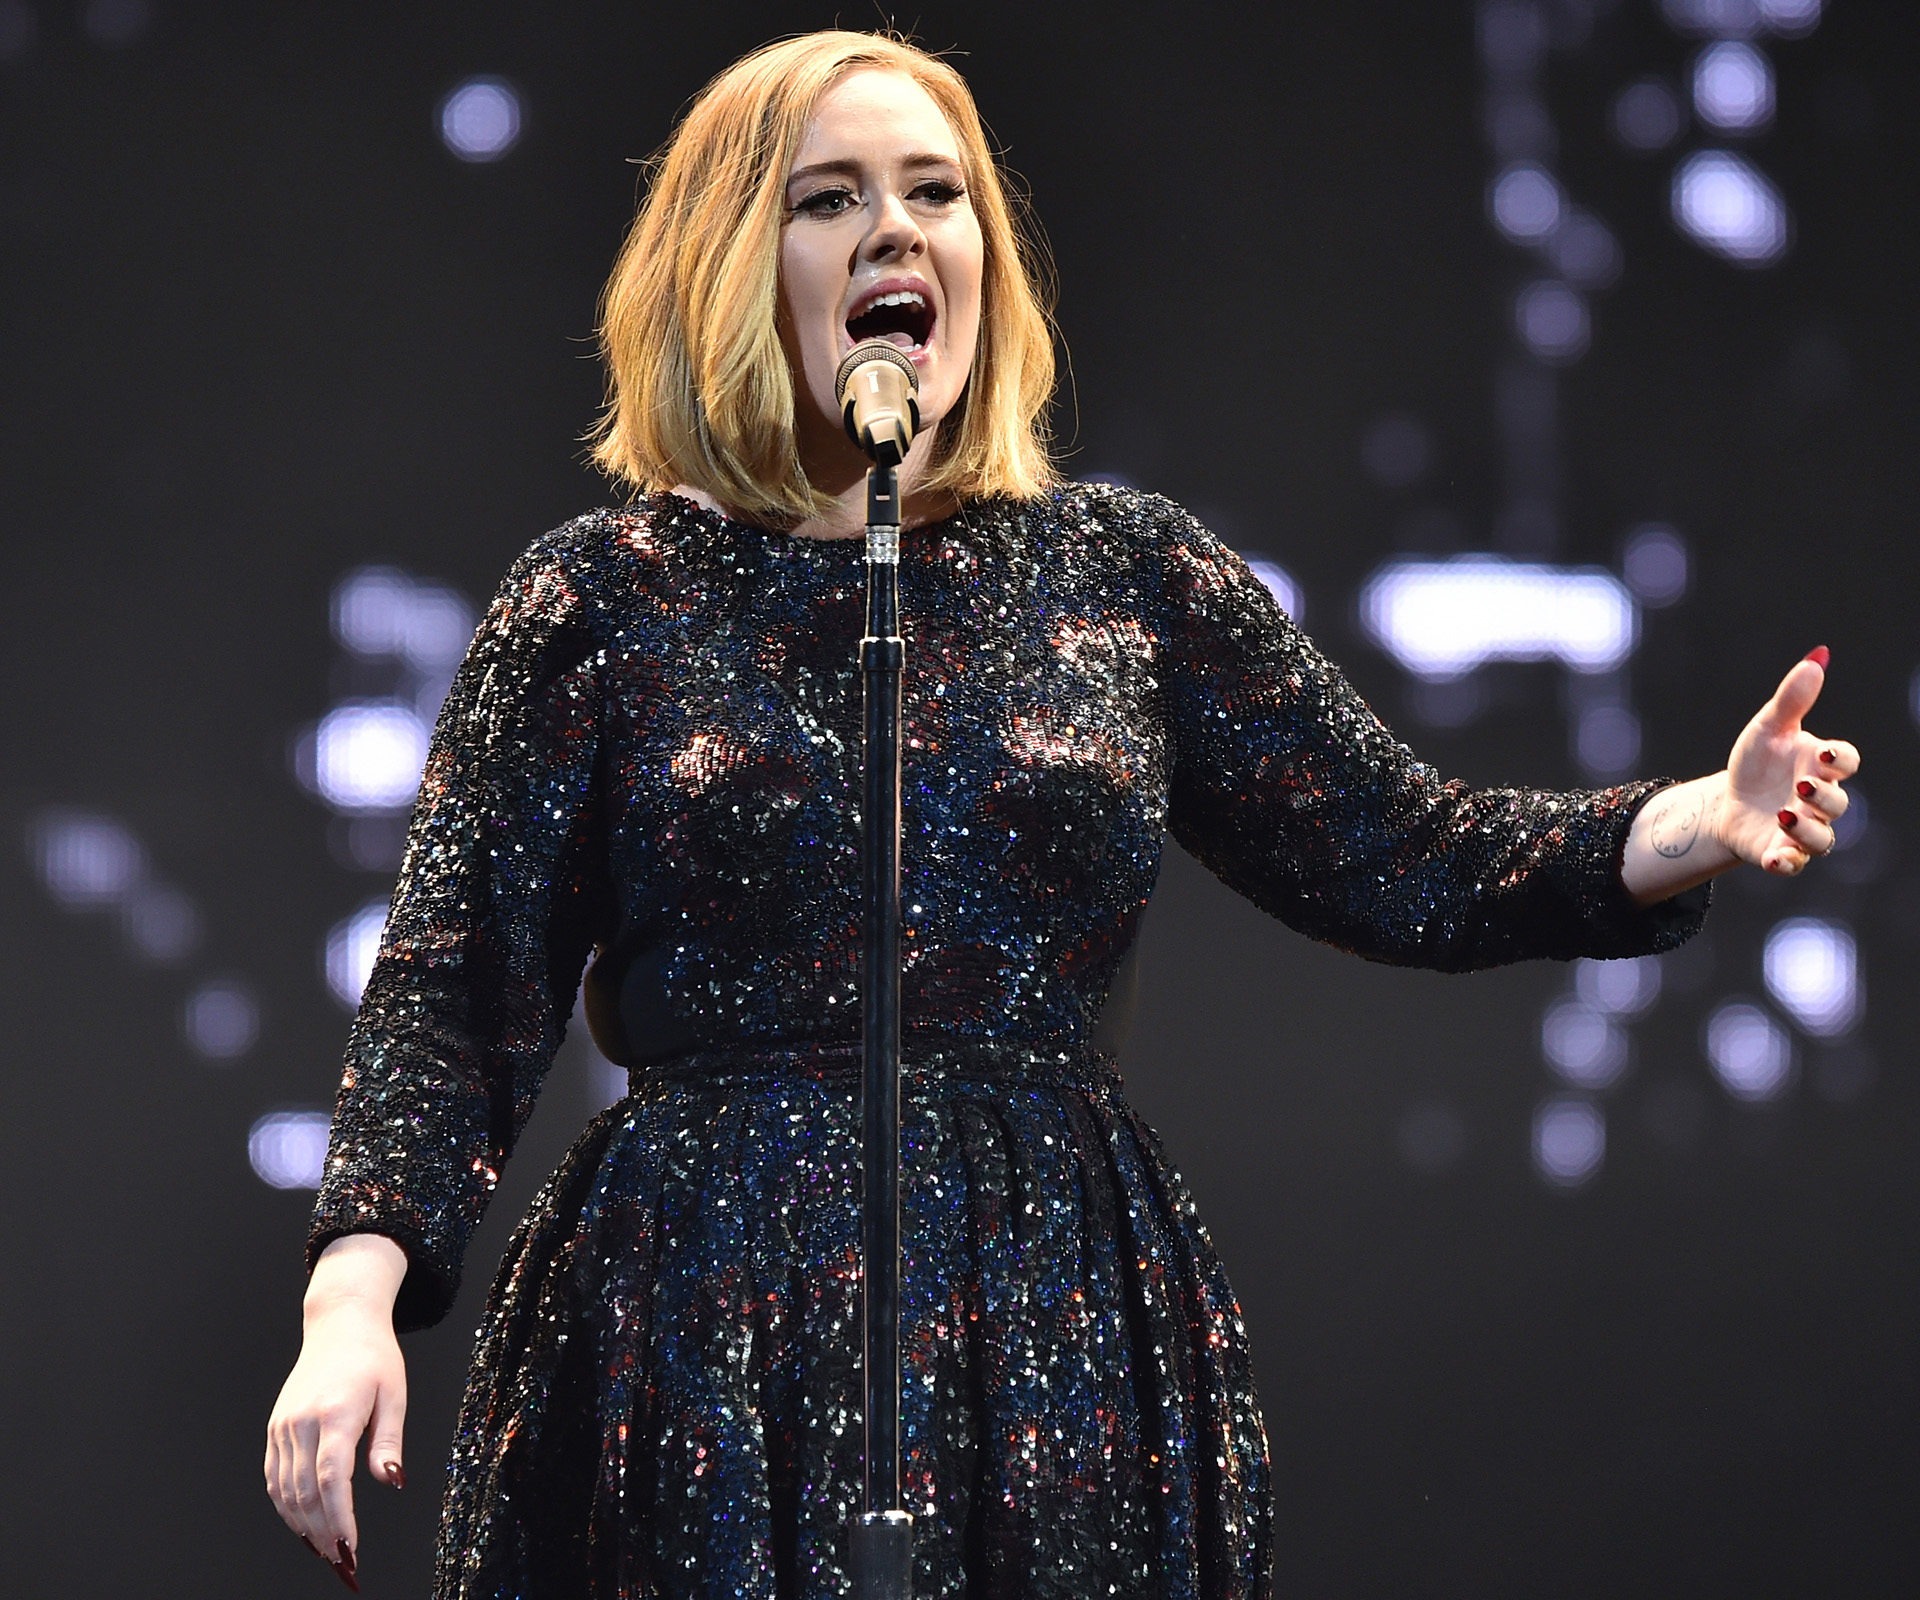 Adele is now the richest female musician under 30.